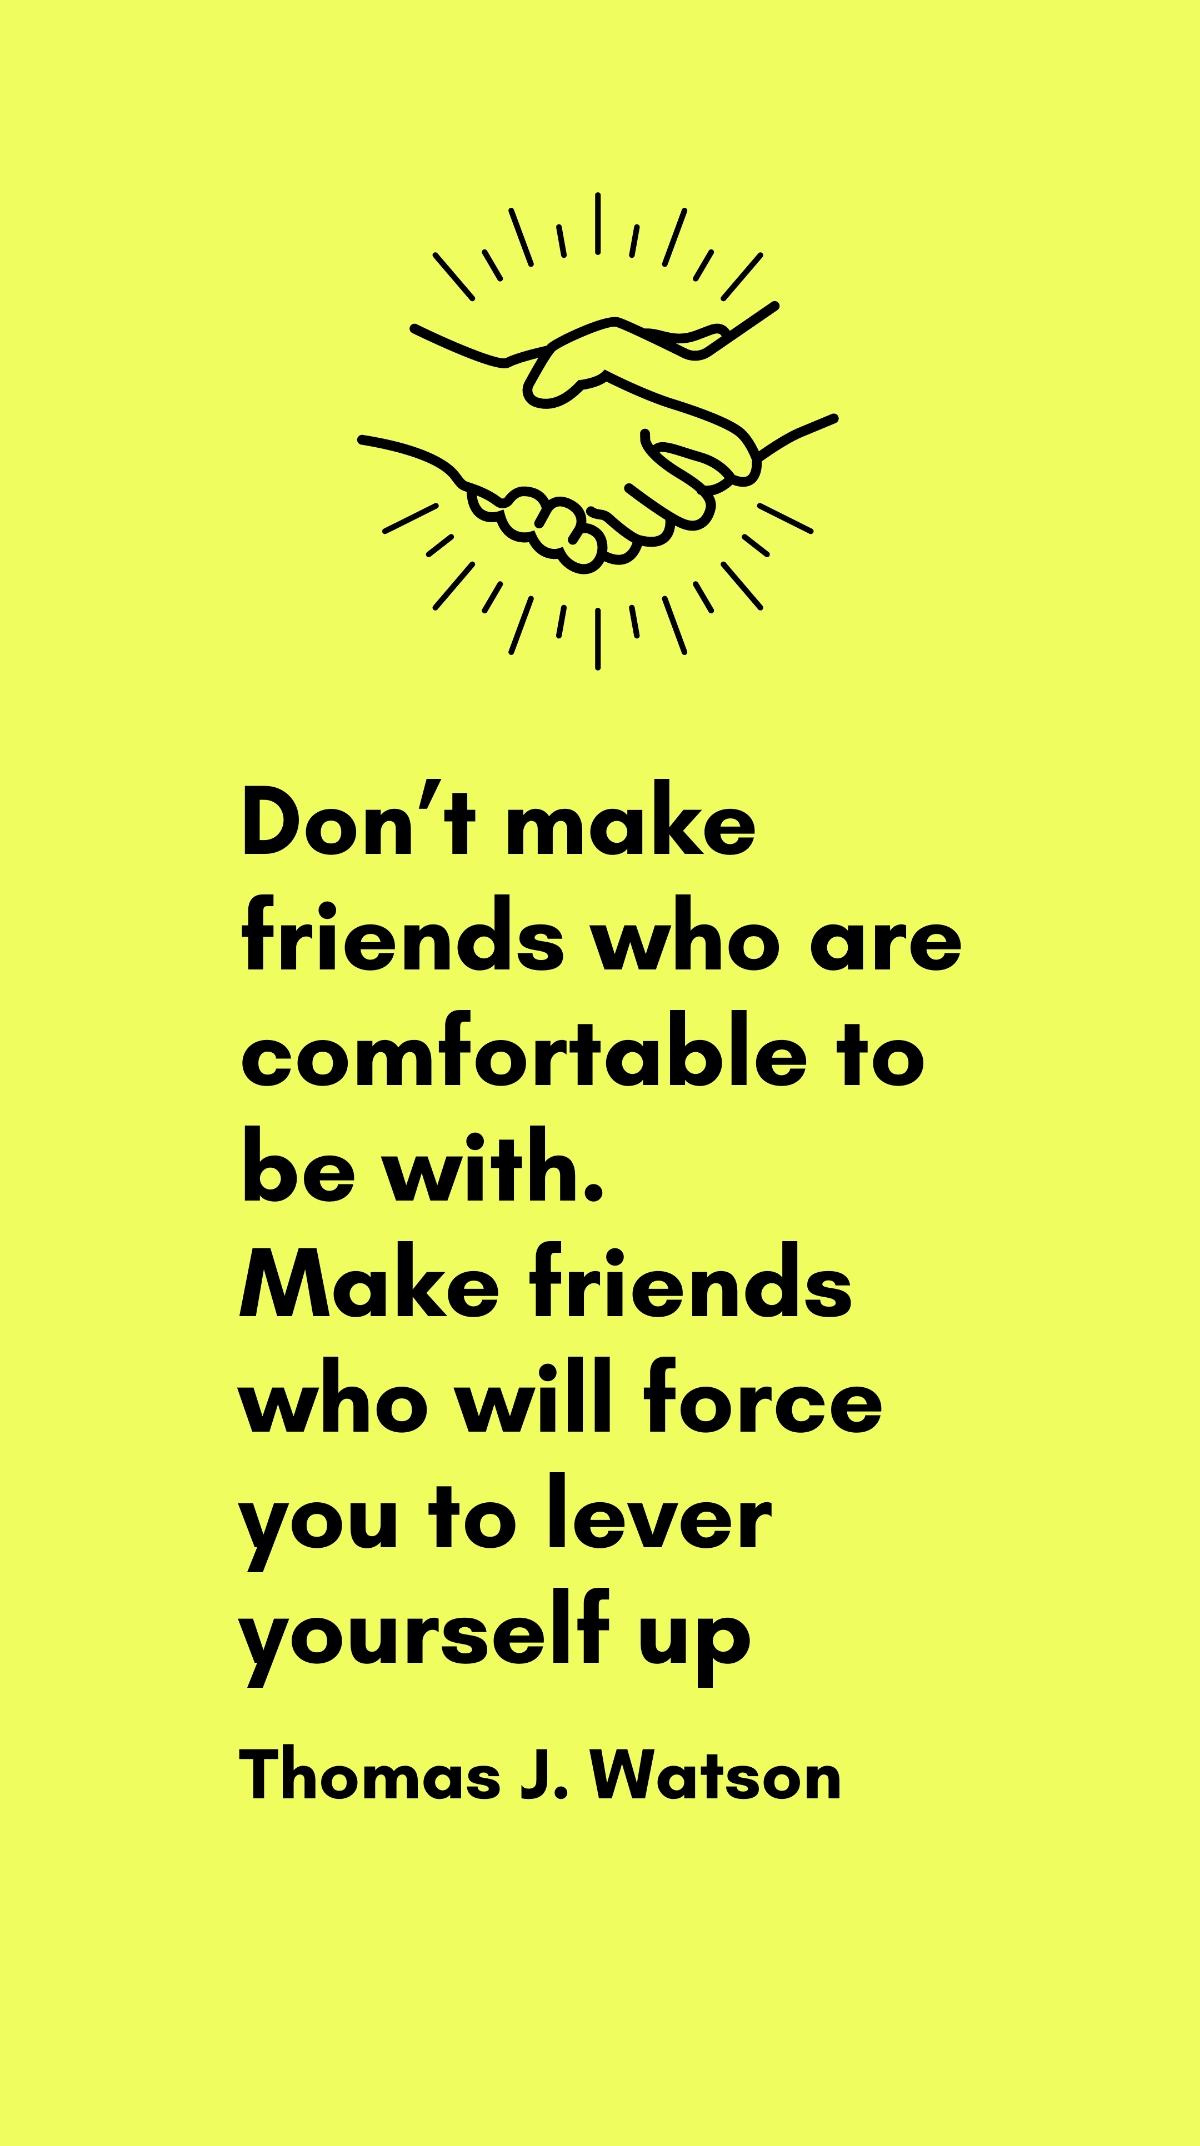 Thomas J. Watson - Don’t make friends who are comfortable to be with. Make friends who will force you to lever yourself up Template